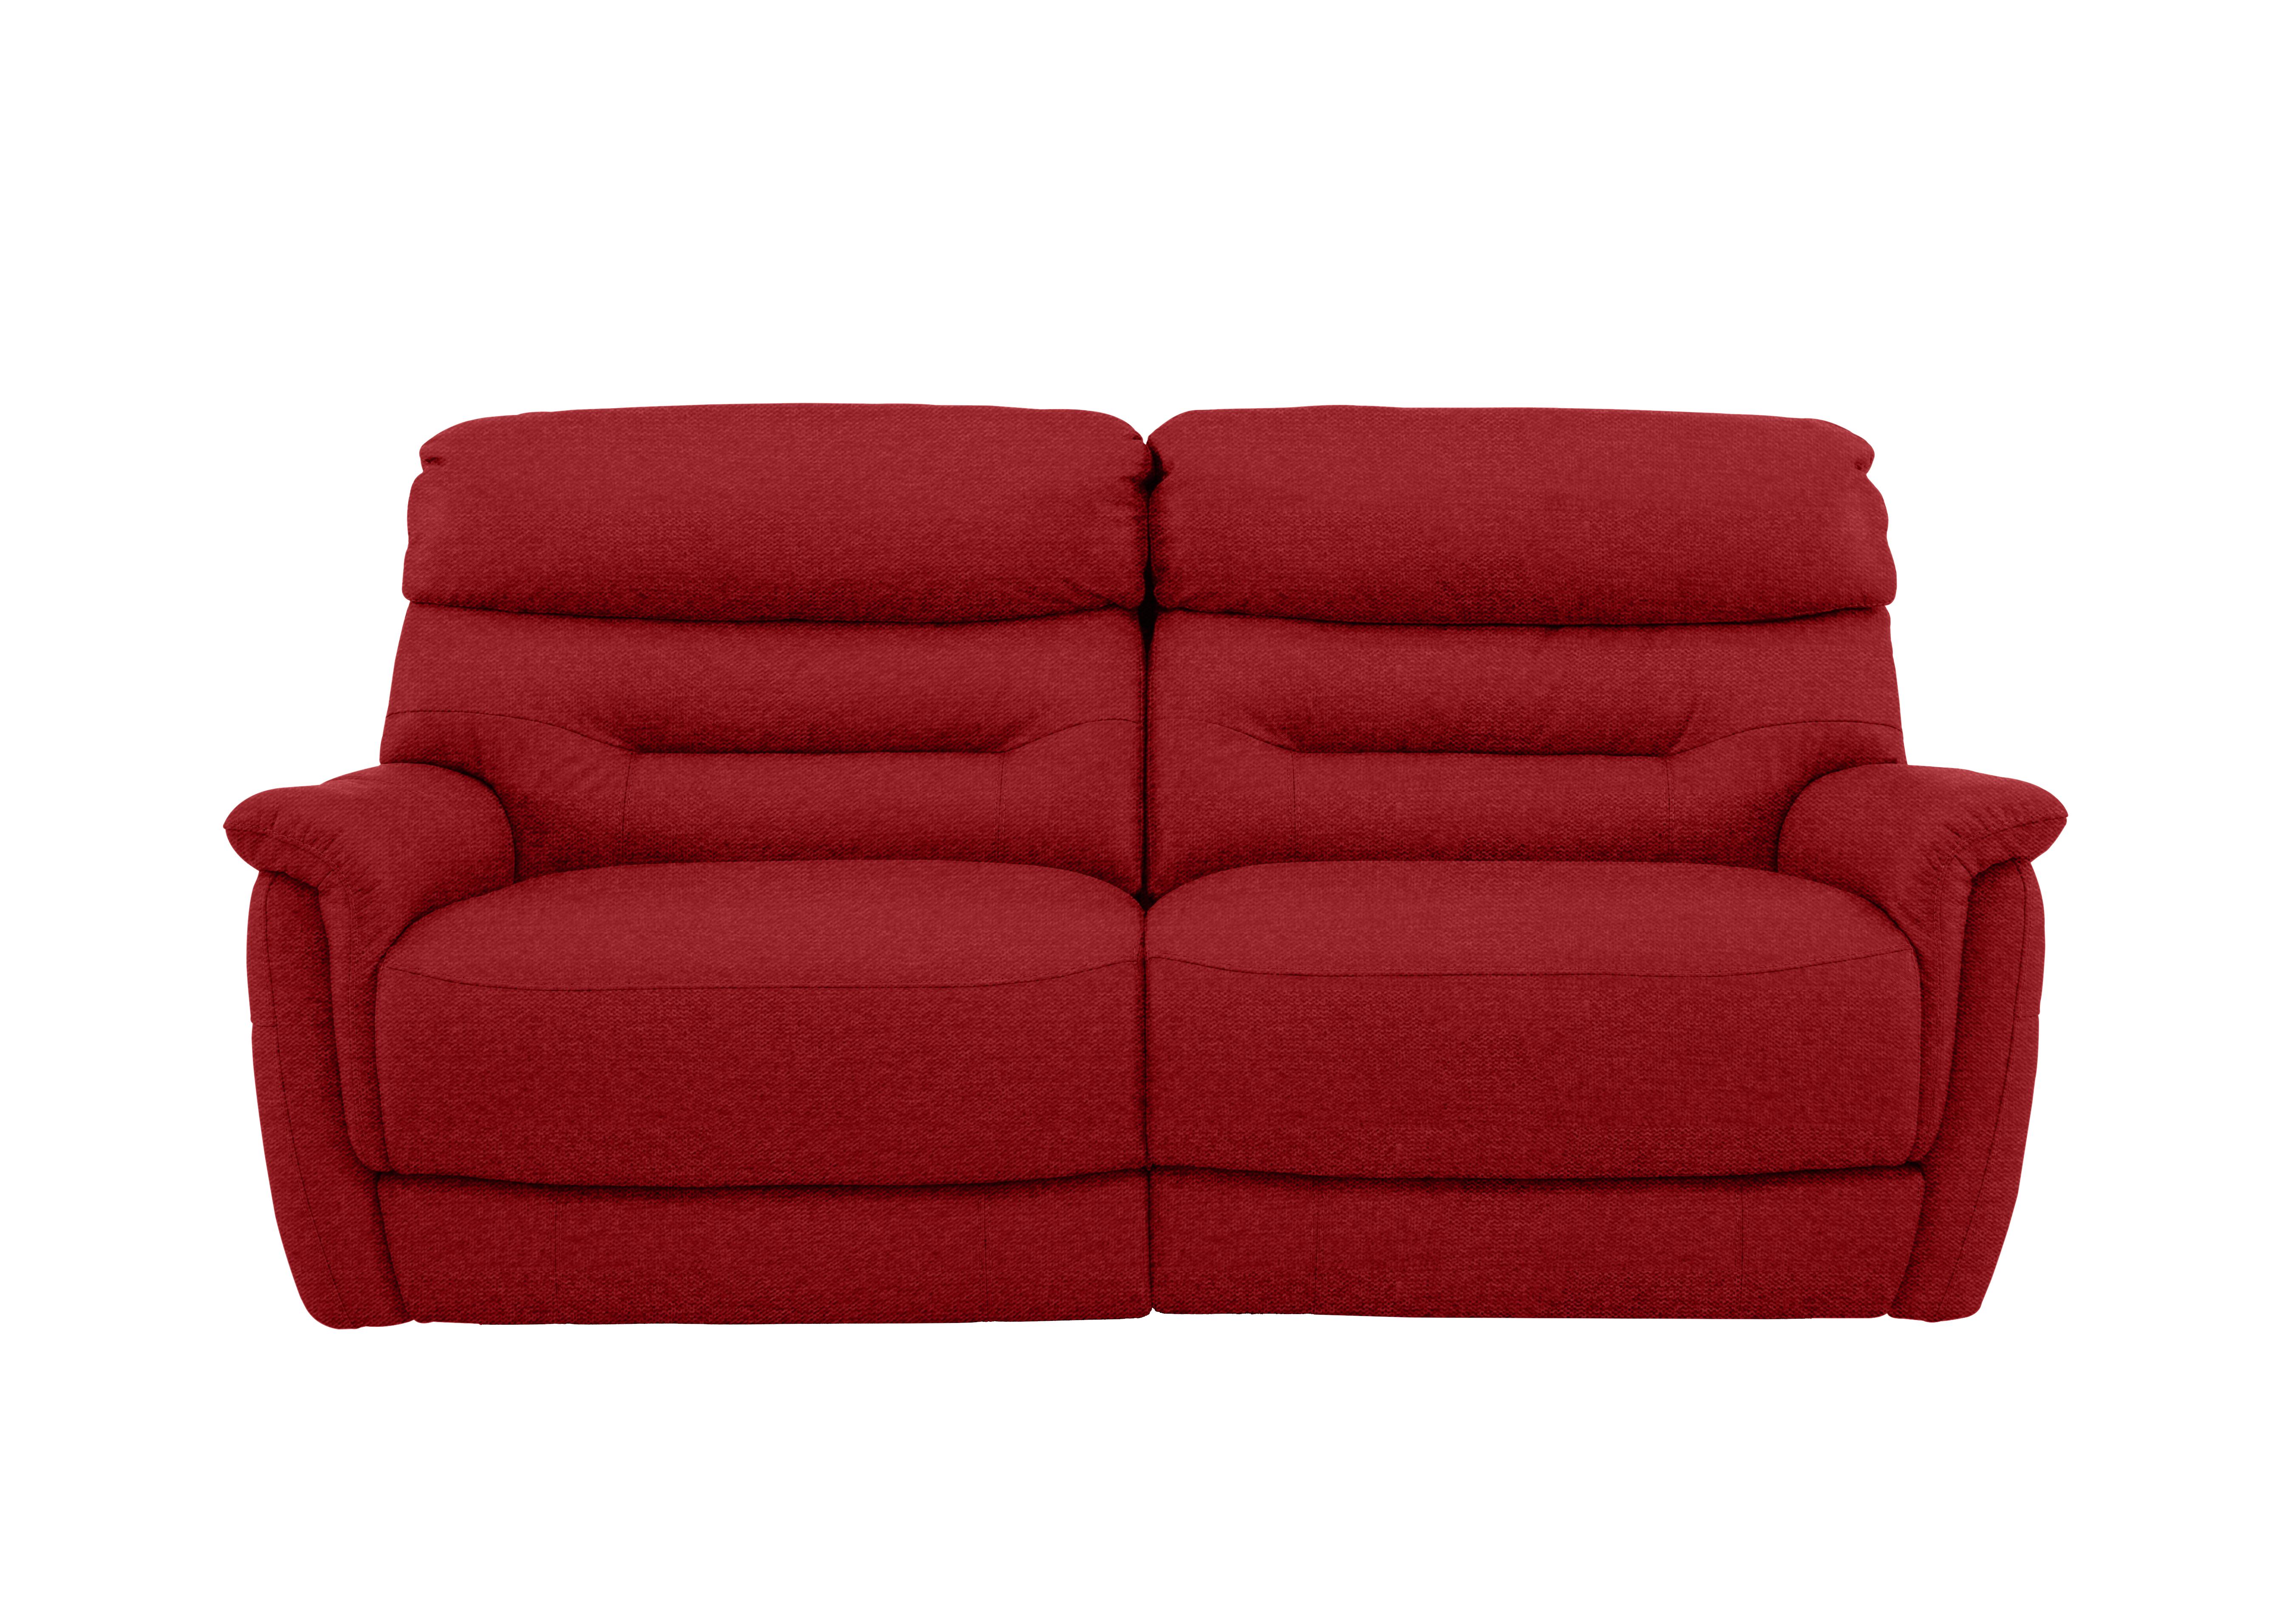 Chicago 3 Seater Fabric Sofa in Fab-Blt-R29 Red on Furniture Village